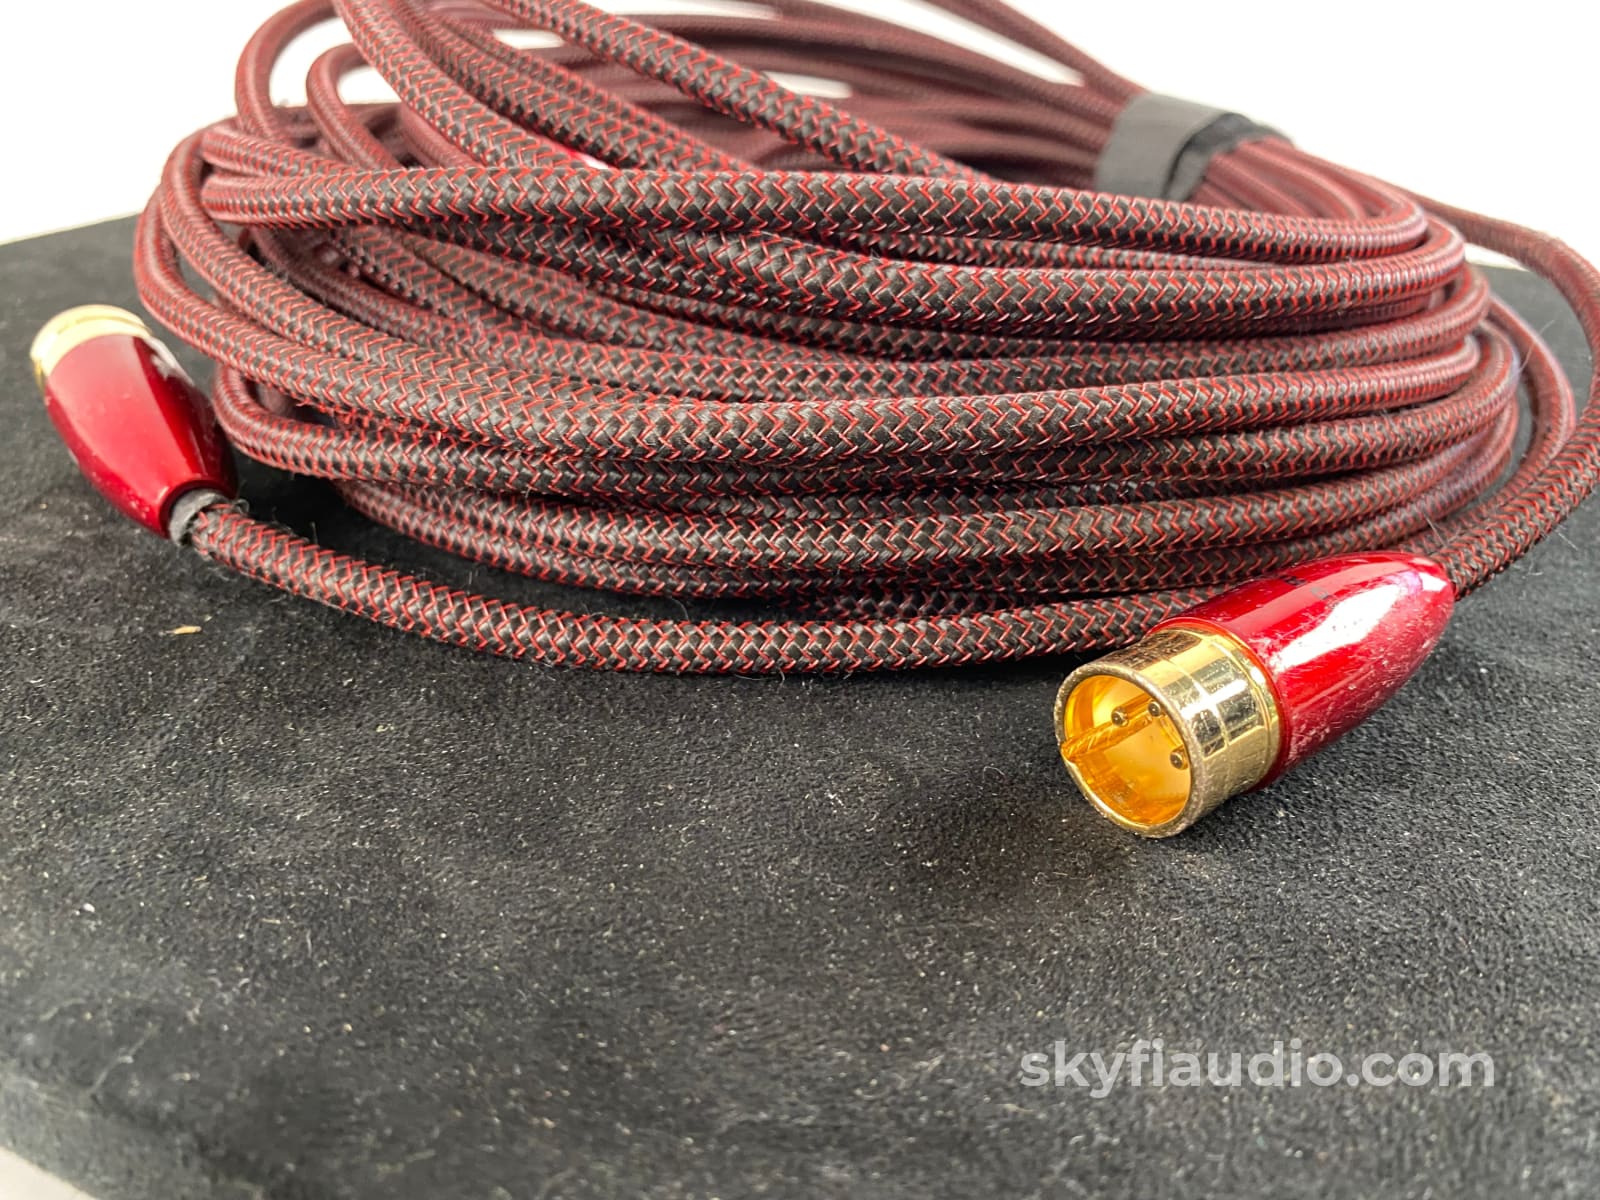 Audioquest Red River Xlr Audio Cable - Super Long Custom 28Ft Perfect For Amps Cables